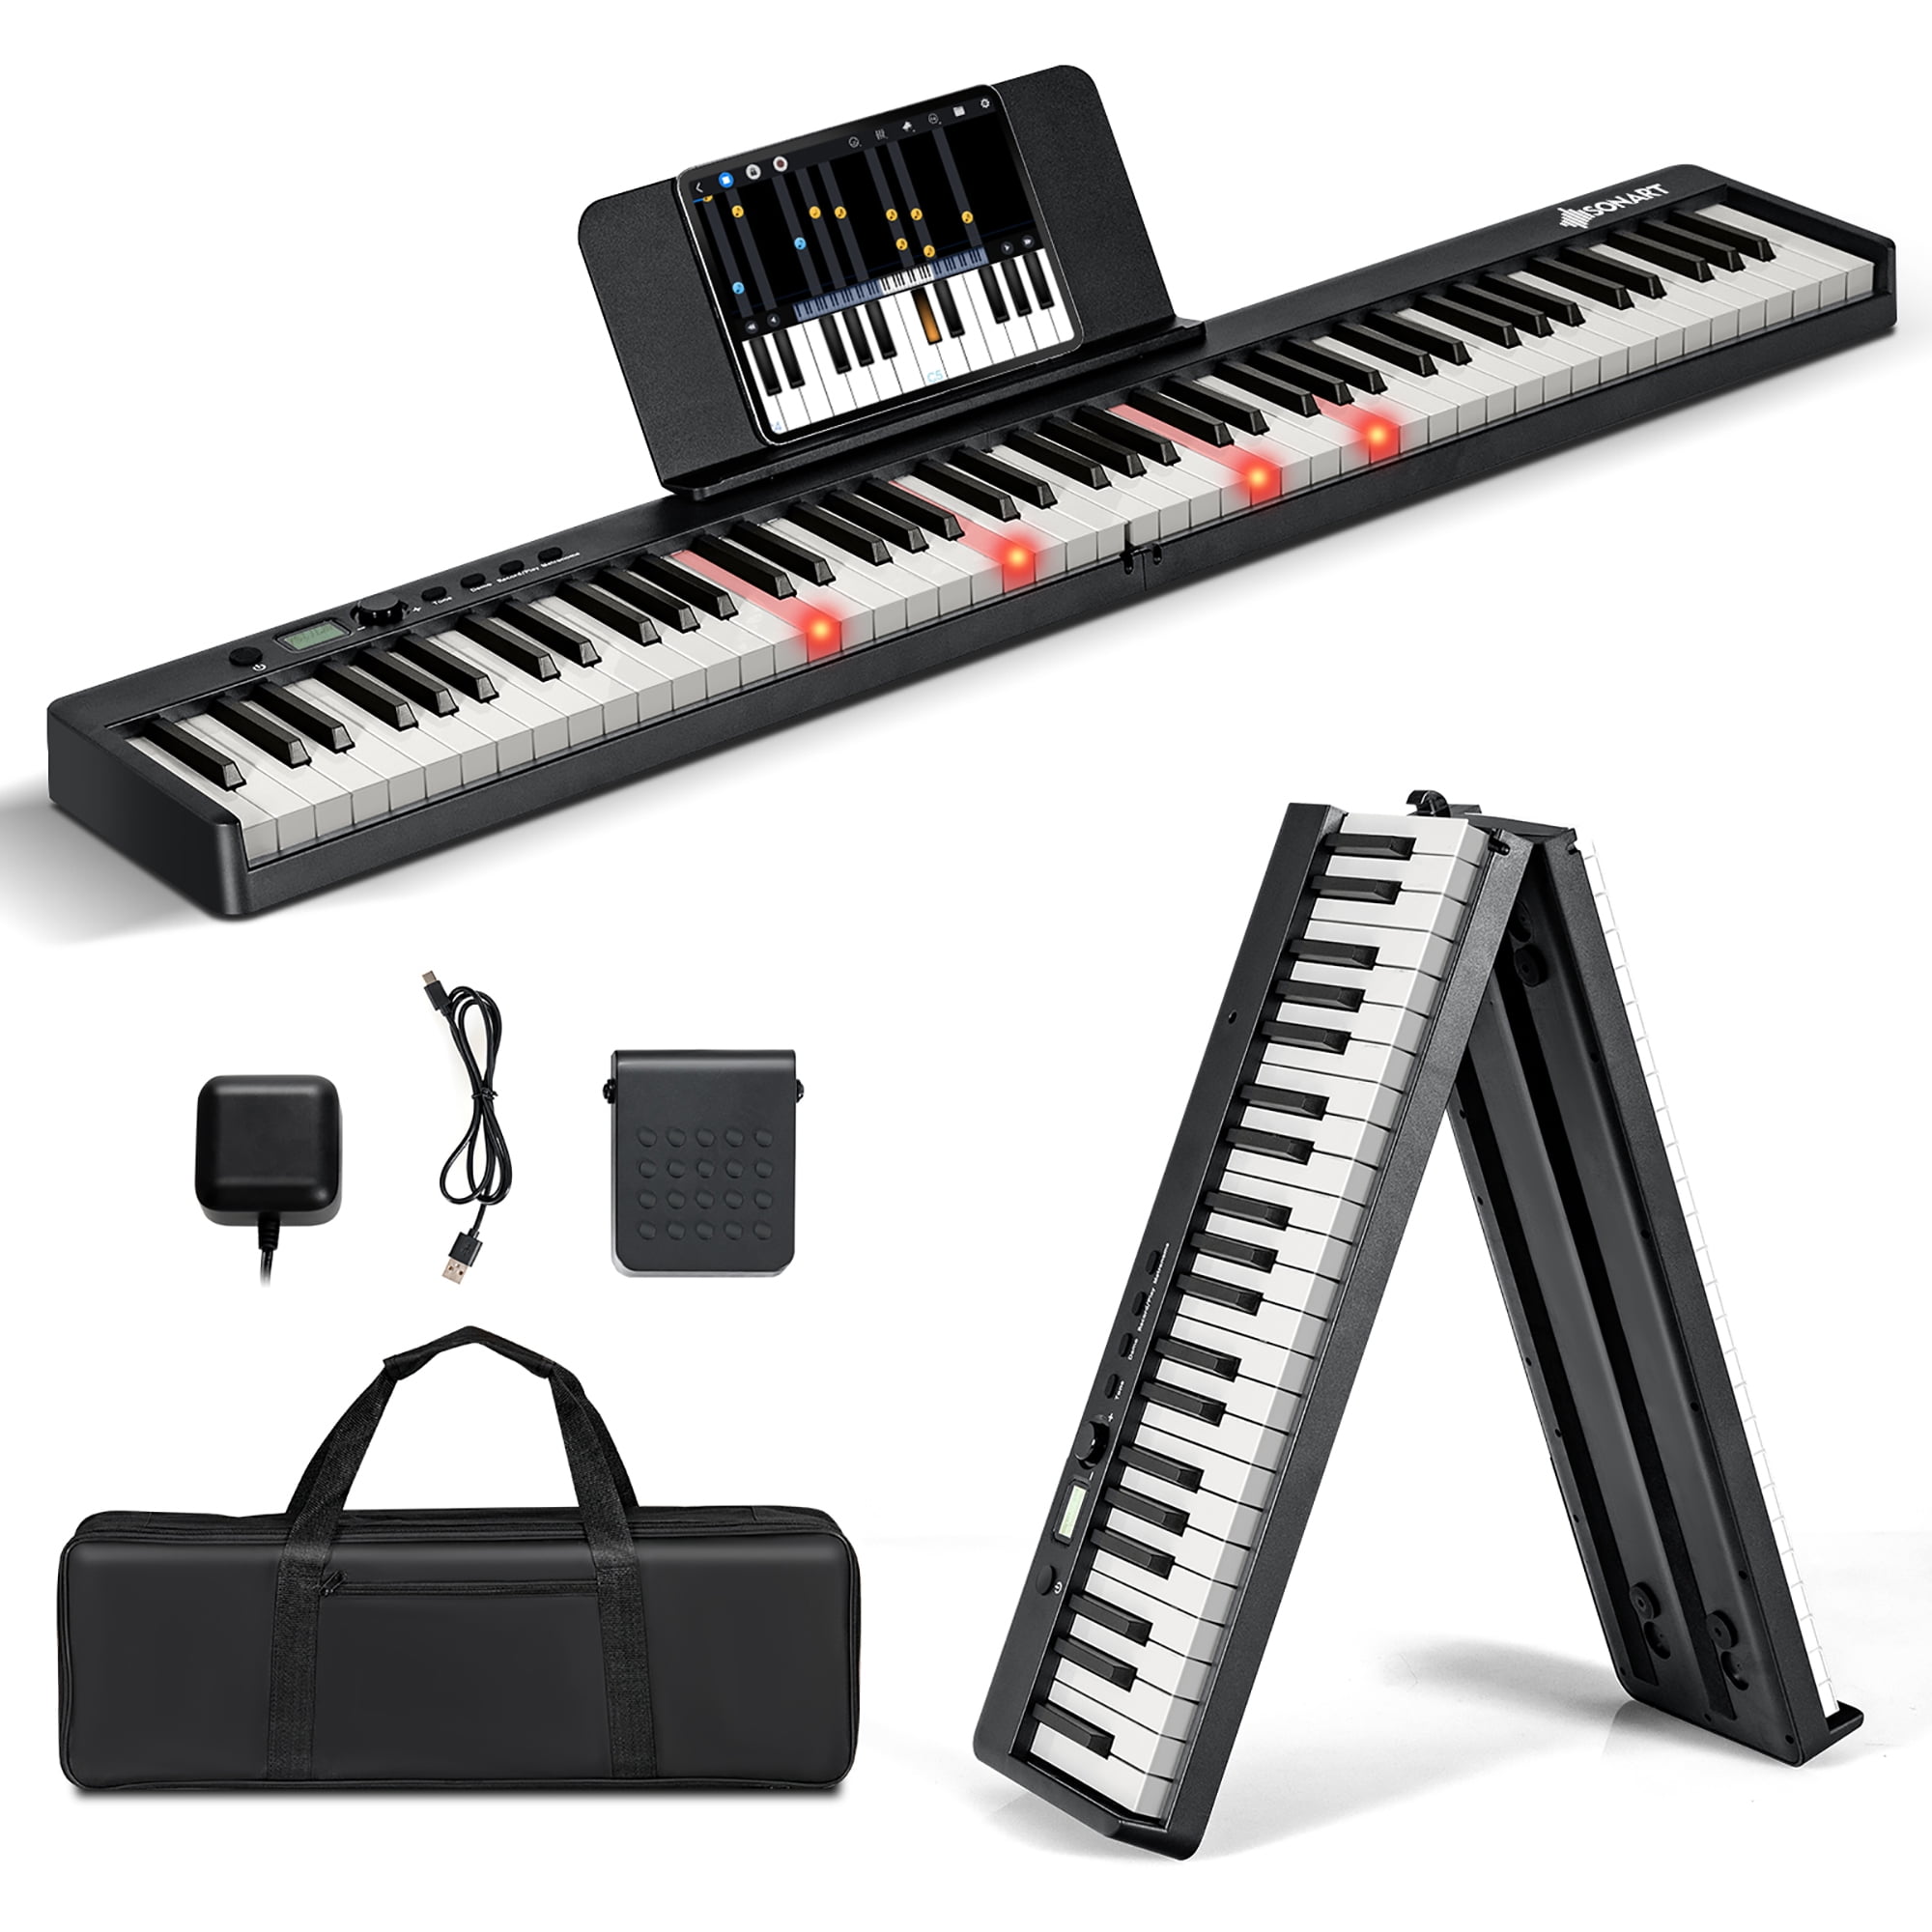 Learn piano online by yourself. Use a tablet or computer to learn piano  tutorials online. The black grand piano has a tablet placed on a notebook  stand. 3D Rendering. 6667060 Stock Photo